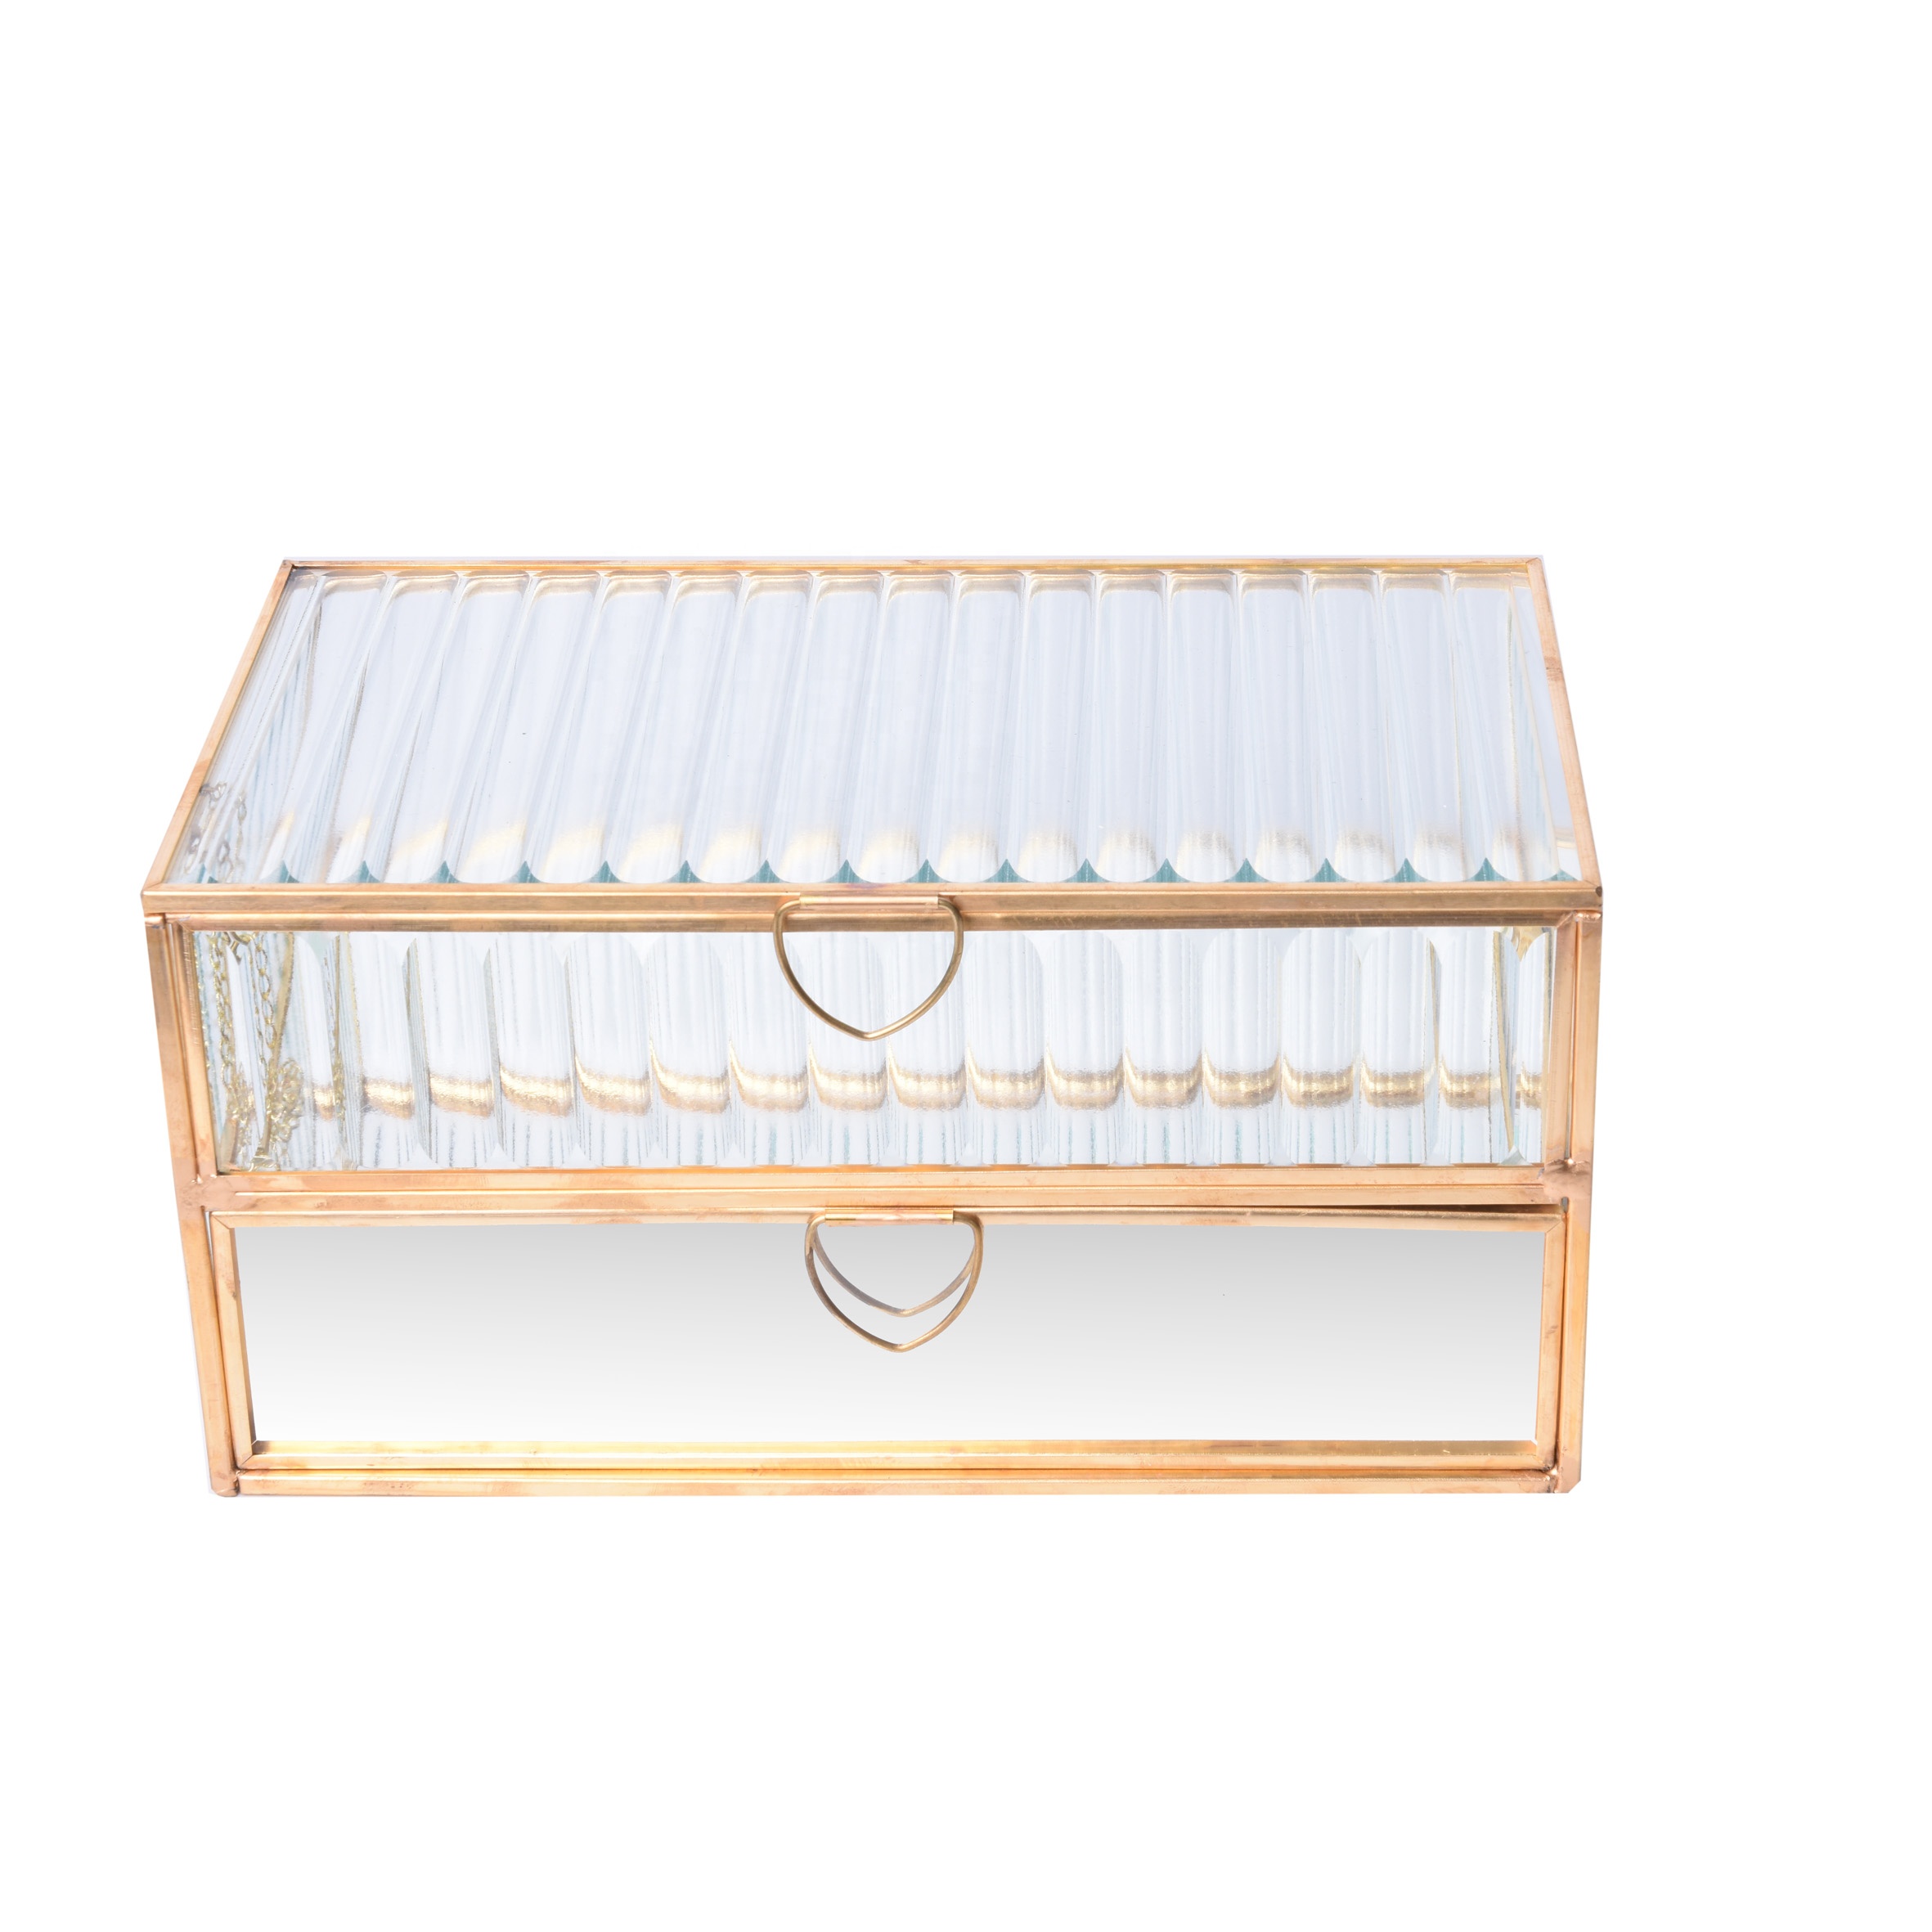 Jewelry Storage Box Double Layer Rectangular Glass Kitchen,dining Room Everyday Support Morden Home Decoratiove